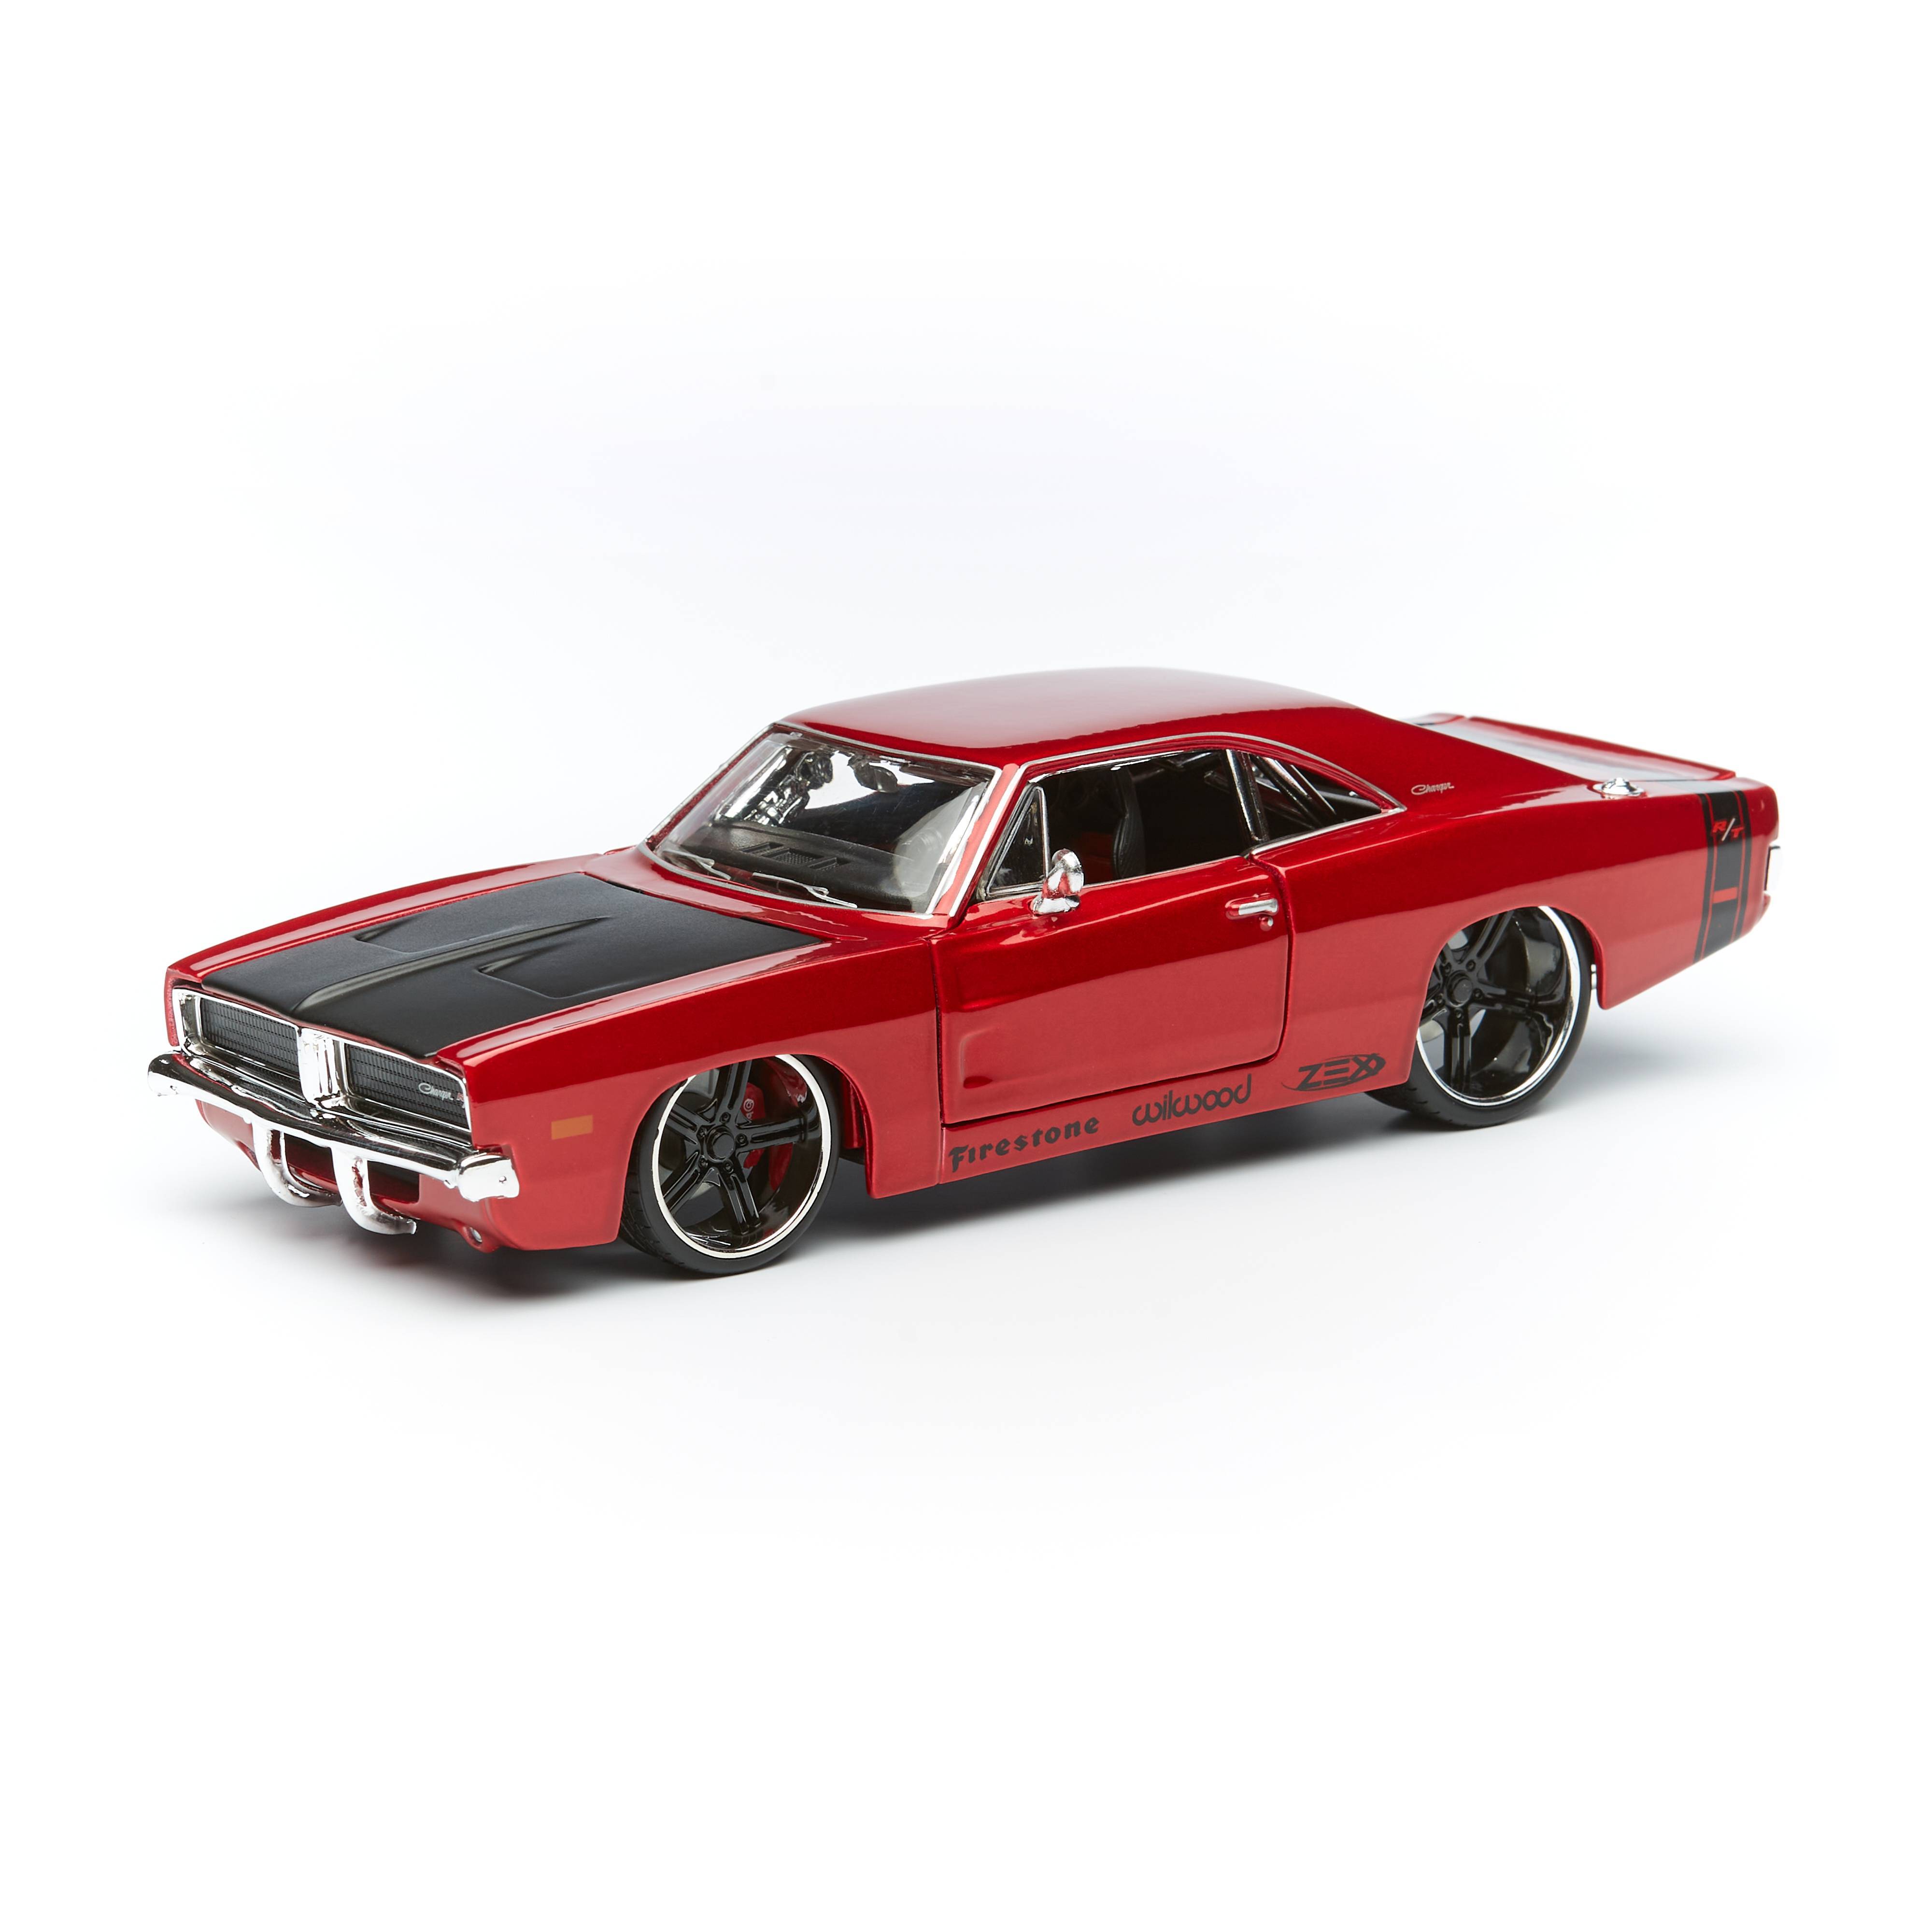 Maisto Машинка 1:25 Design Classic Muscle - 1969 Dodge Charger R/T, красная 32537 jada toys big time muscle 1969 dodge charger daytona orange 71 1 24 scale die cast vehicle collectible car